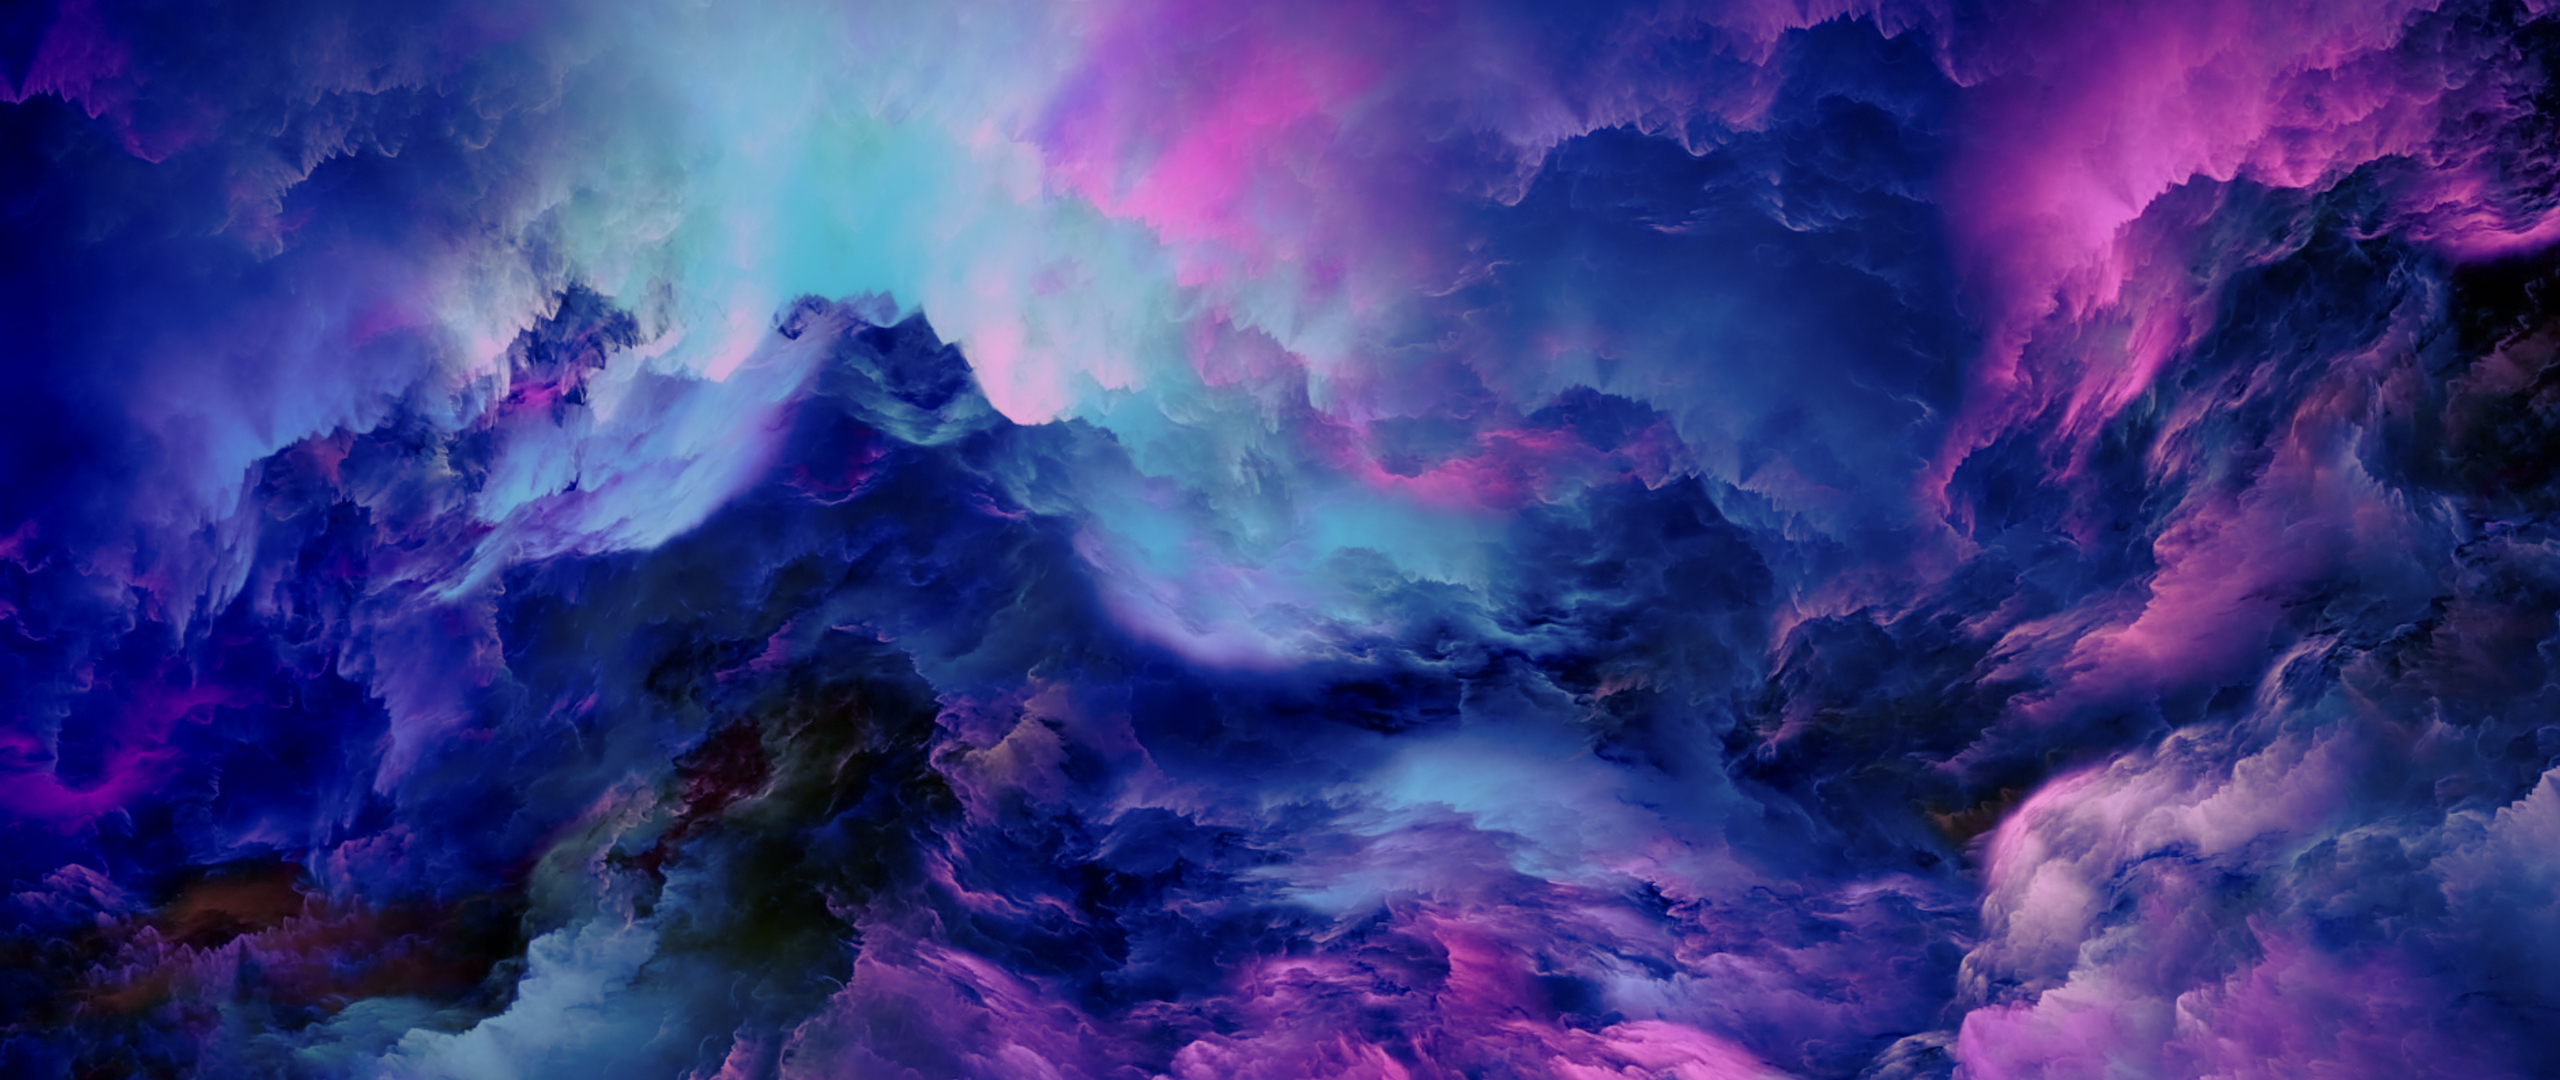 clouds-performing-abstract-ht-2560x1080.jpg